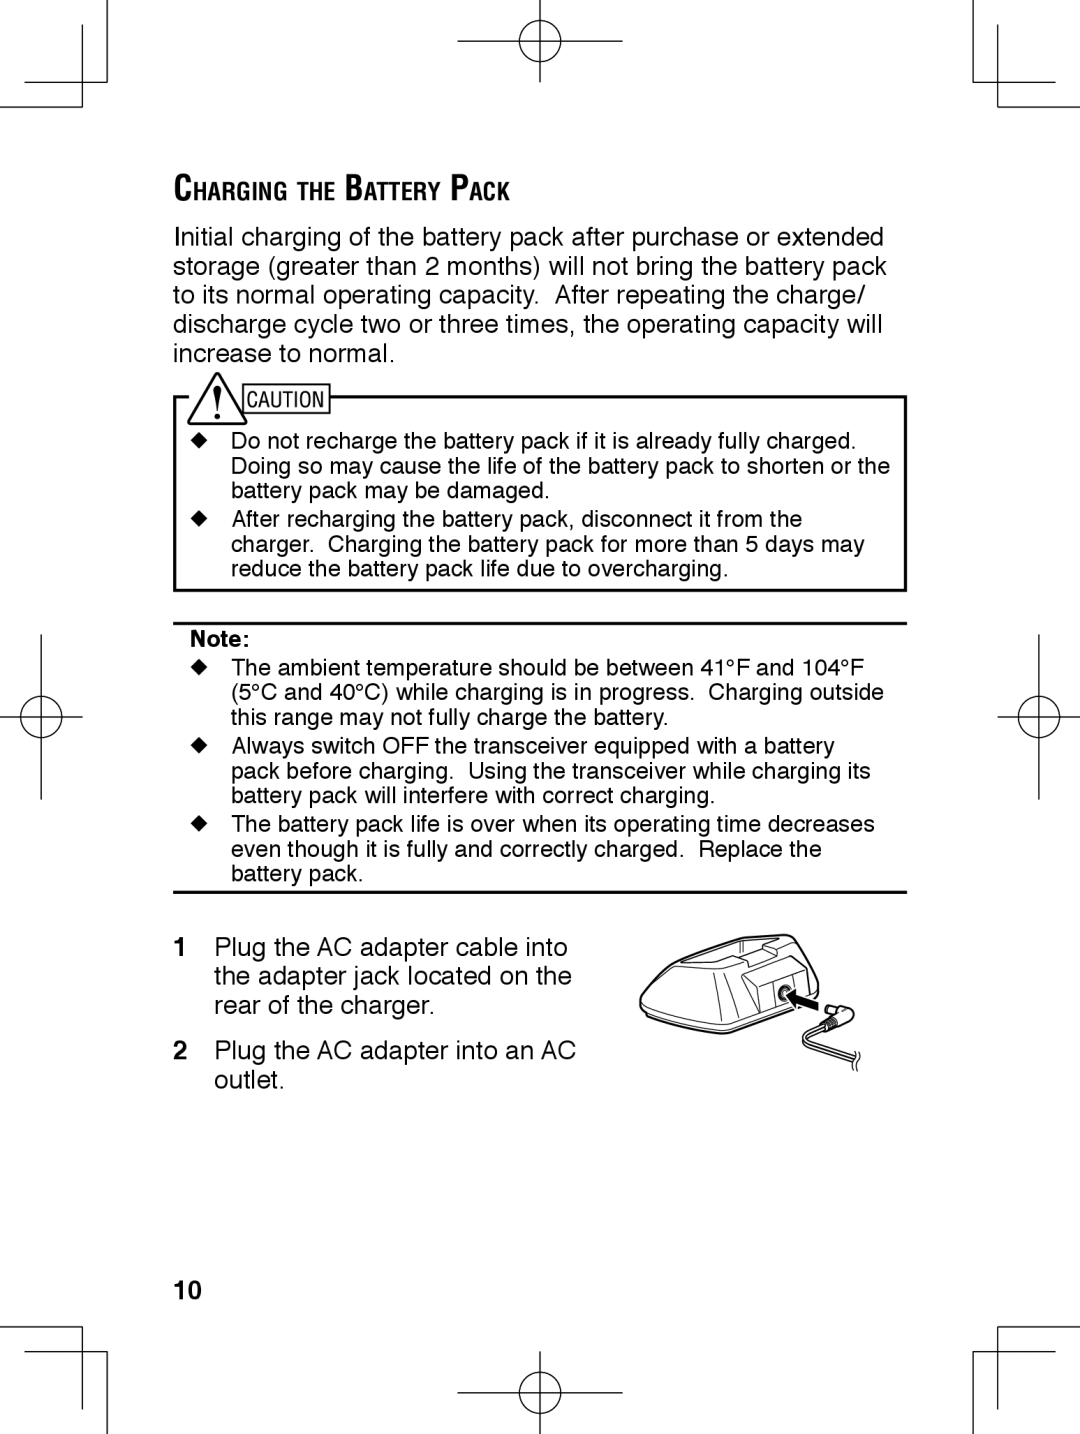 Kenwood TK-3230 instruction manual Plug the AC adapter into an AC outlet 